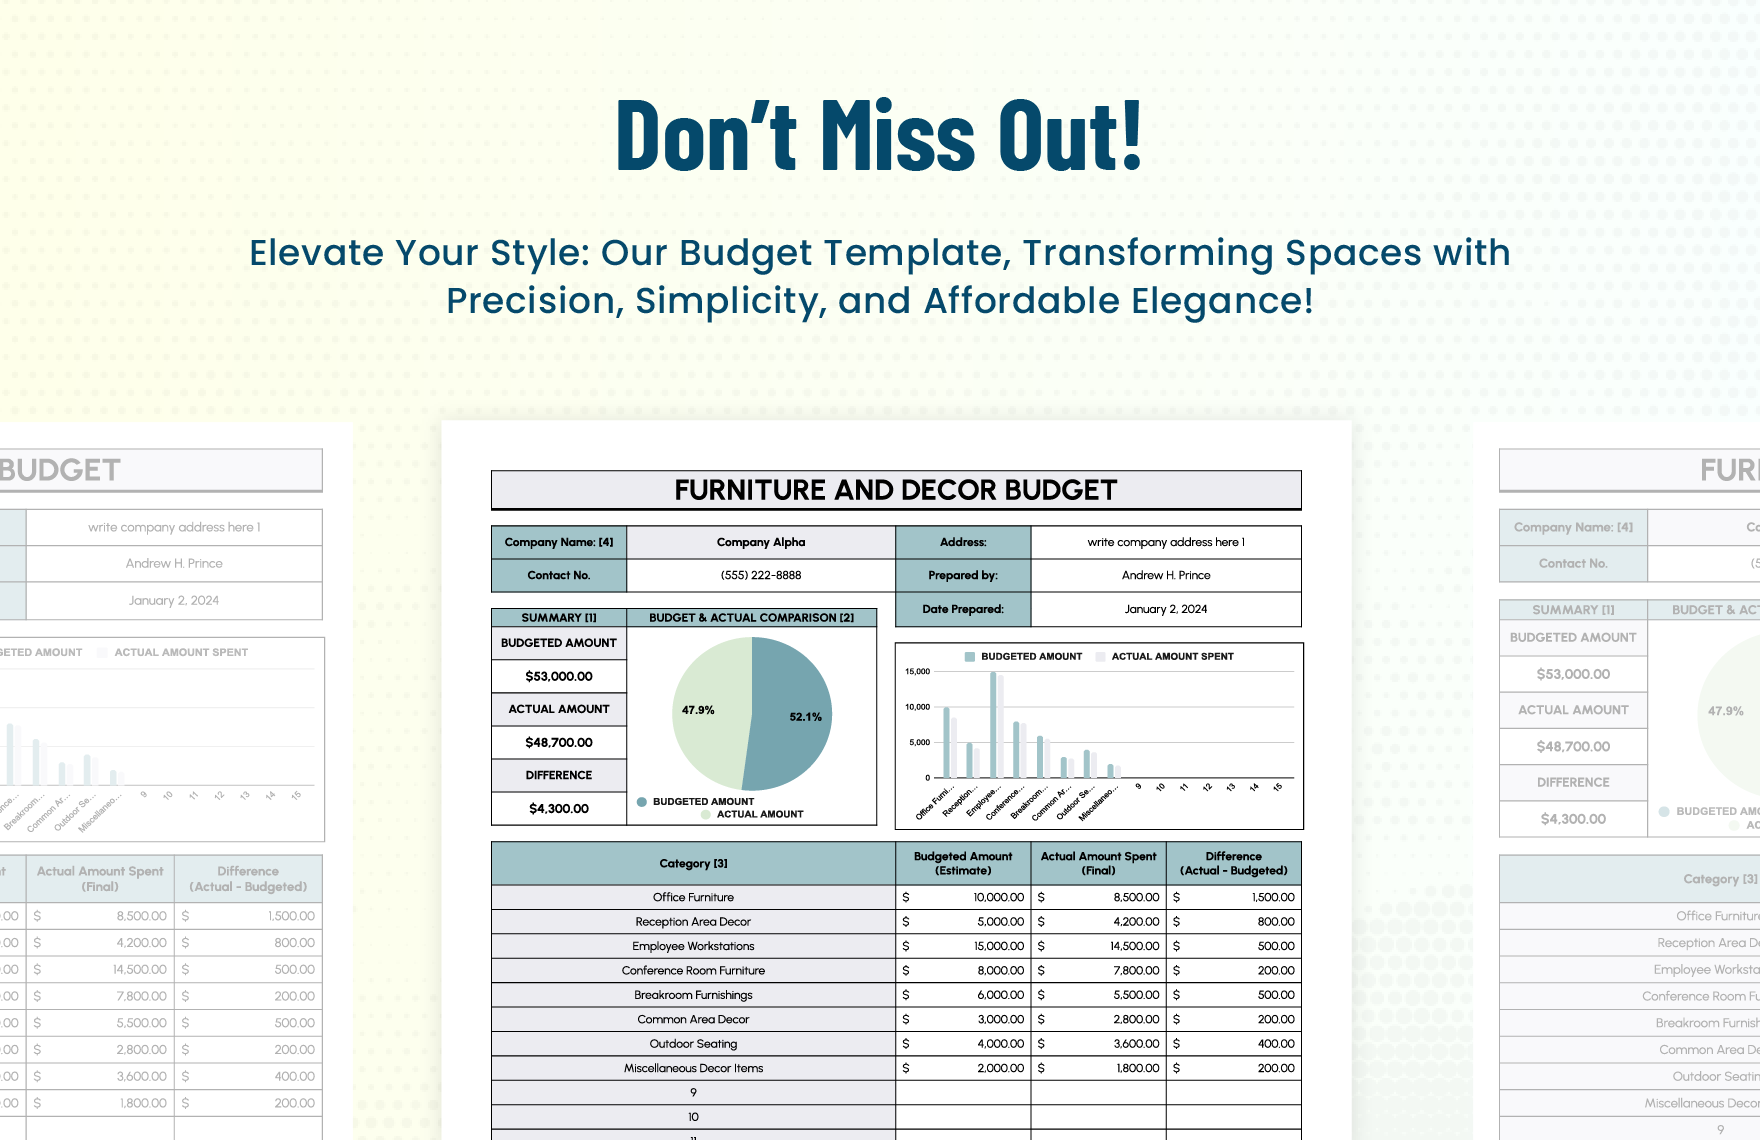 Furniture and Decor Budget Template